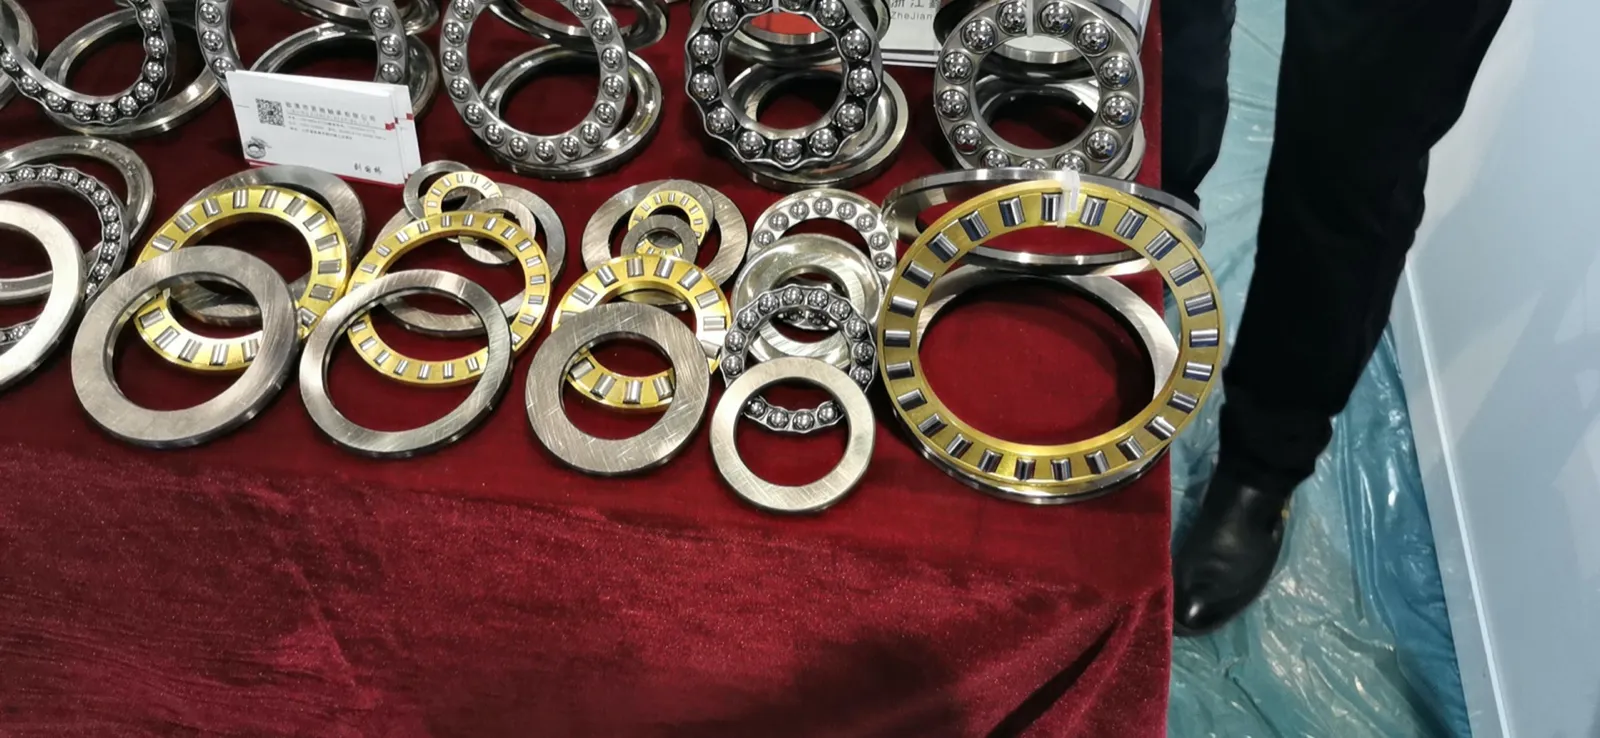 double-structured spherical thrust bearing high performance for wholesale